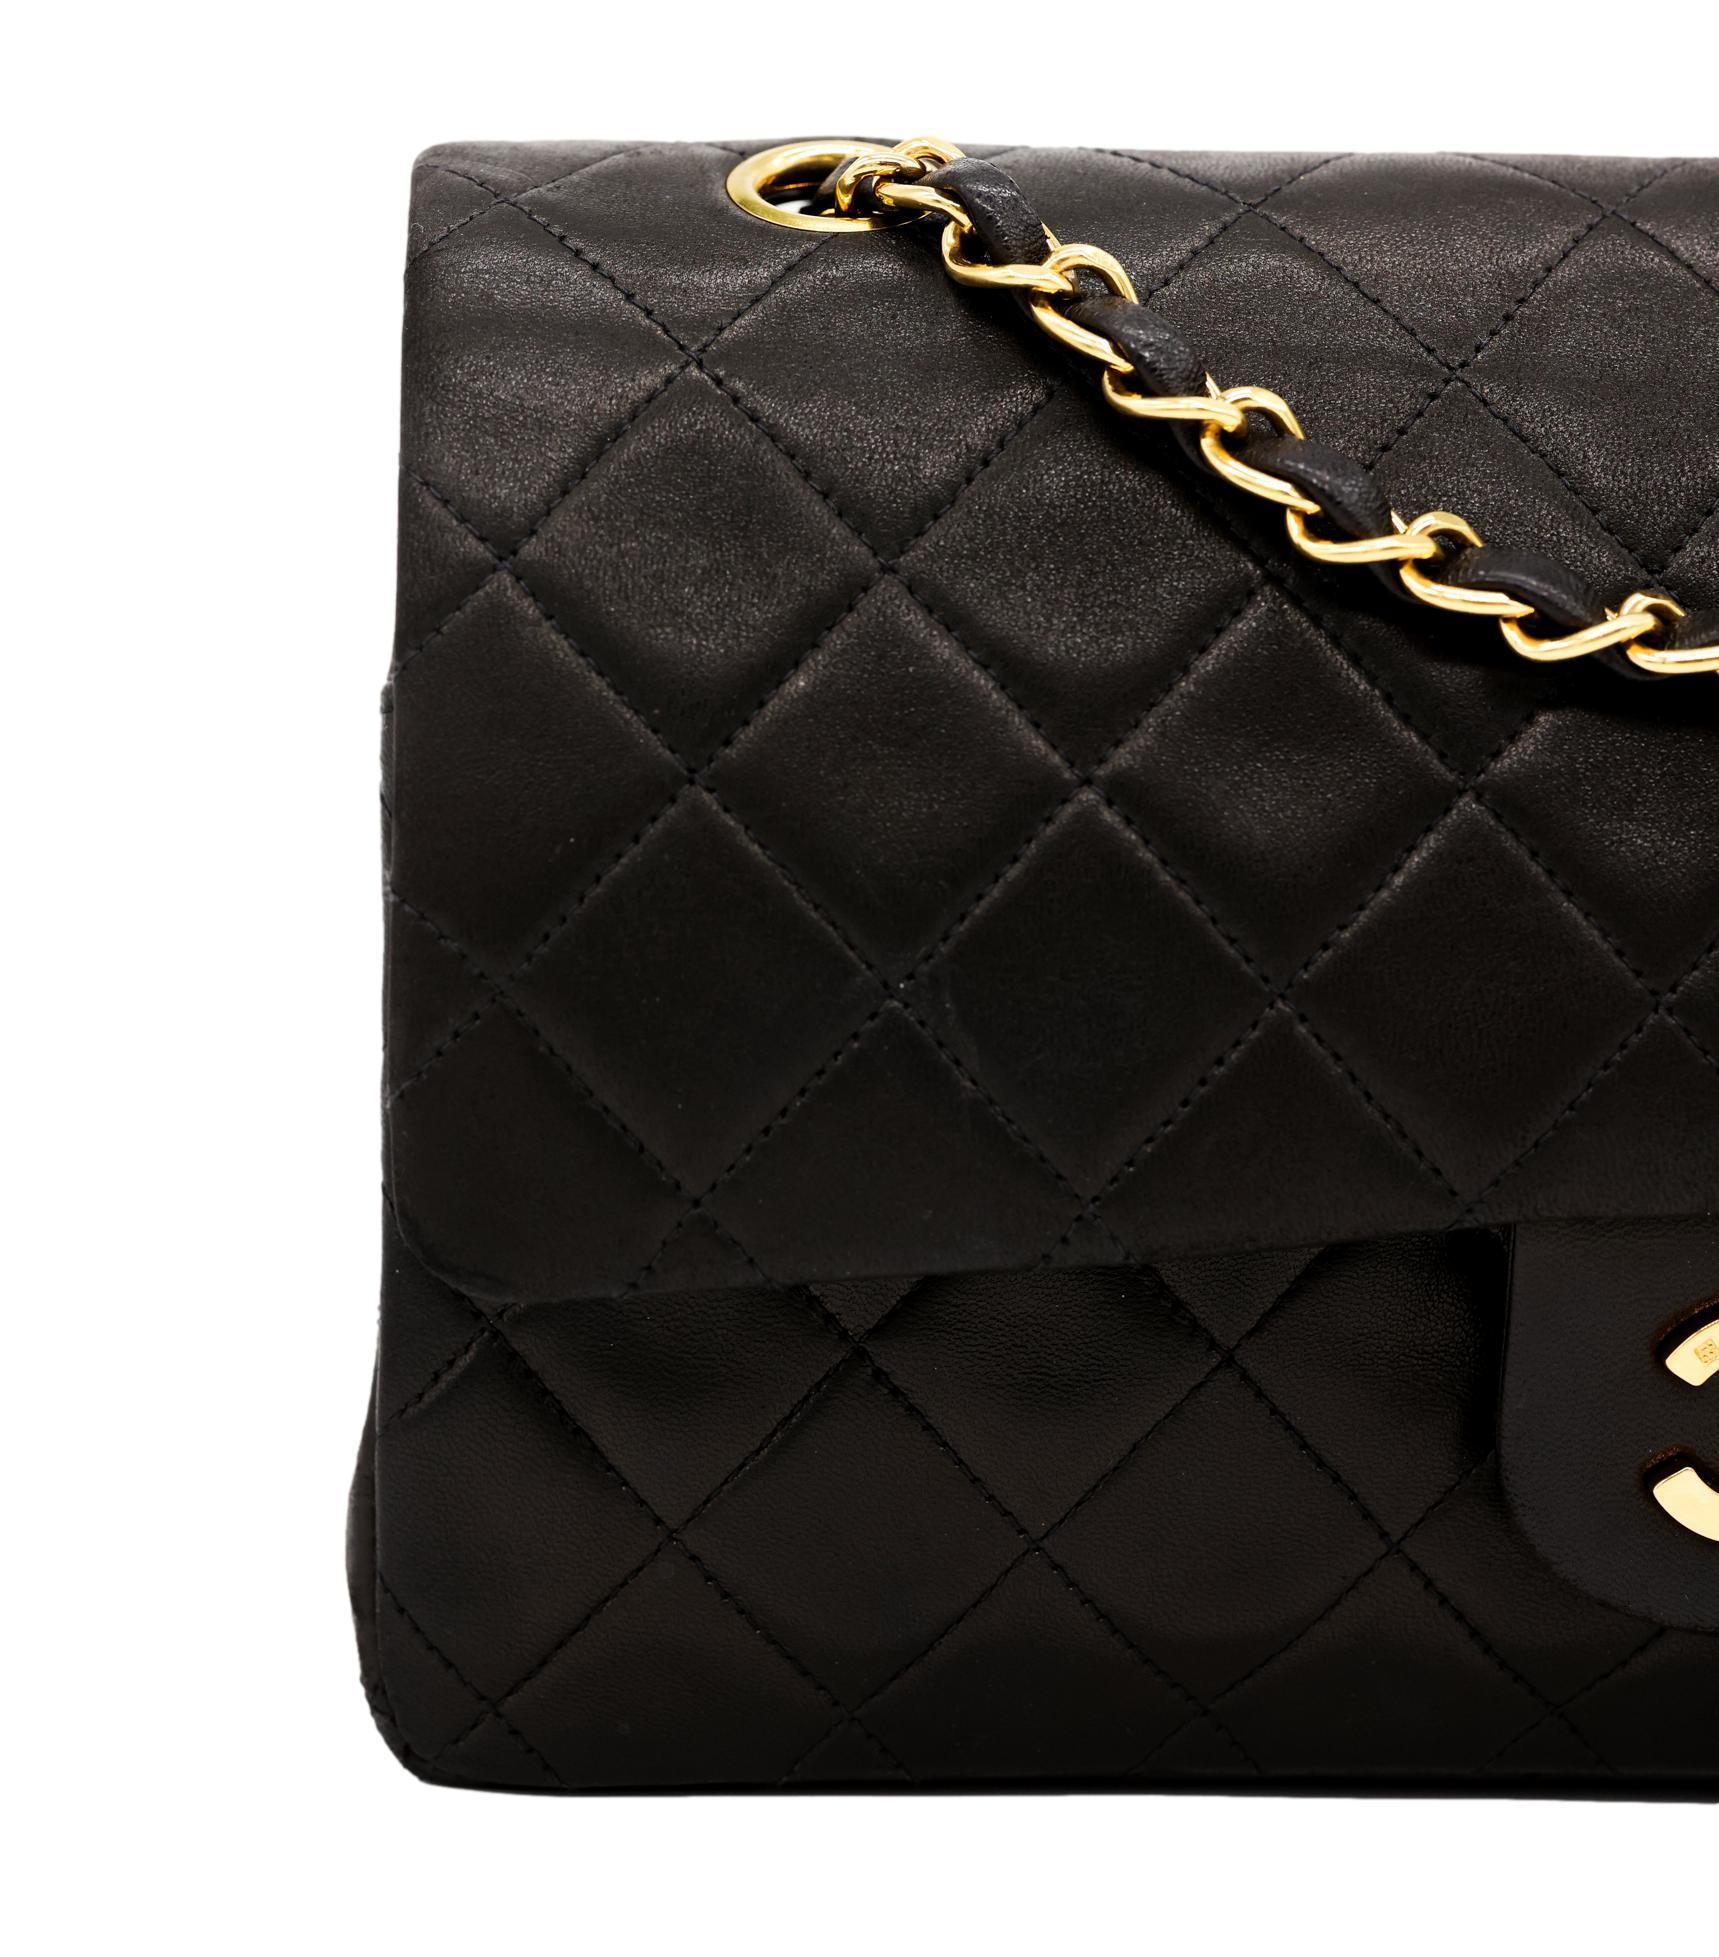 Chanel Timeless Black Medium Double Flap Quilted Lambskin Shoulder Bag, 2019. 3